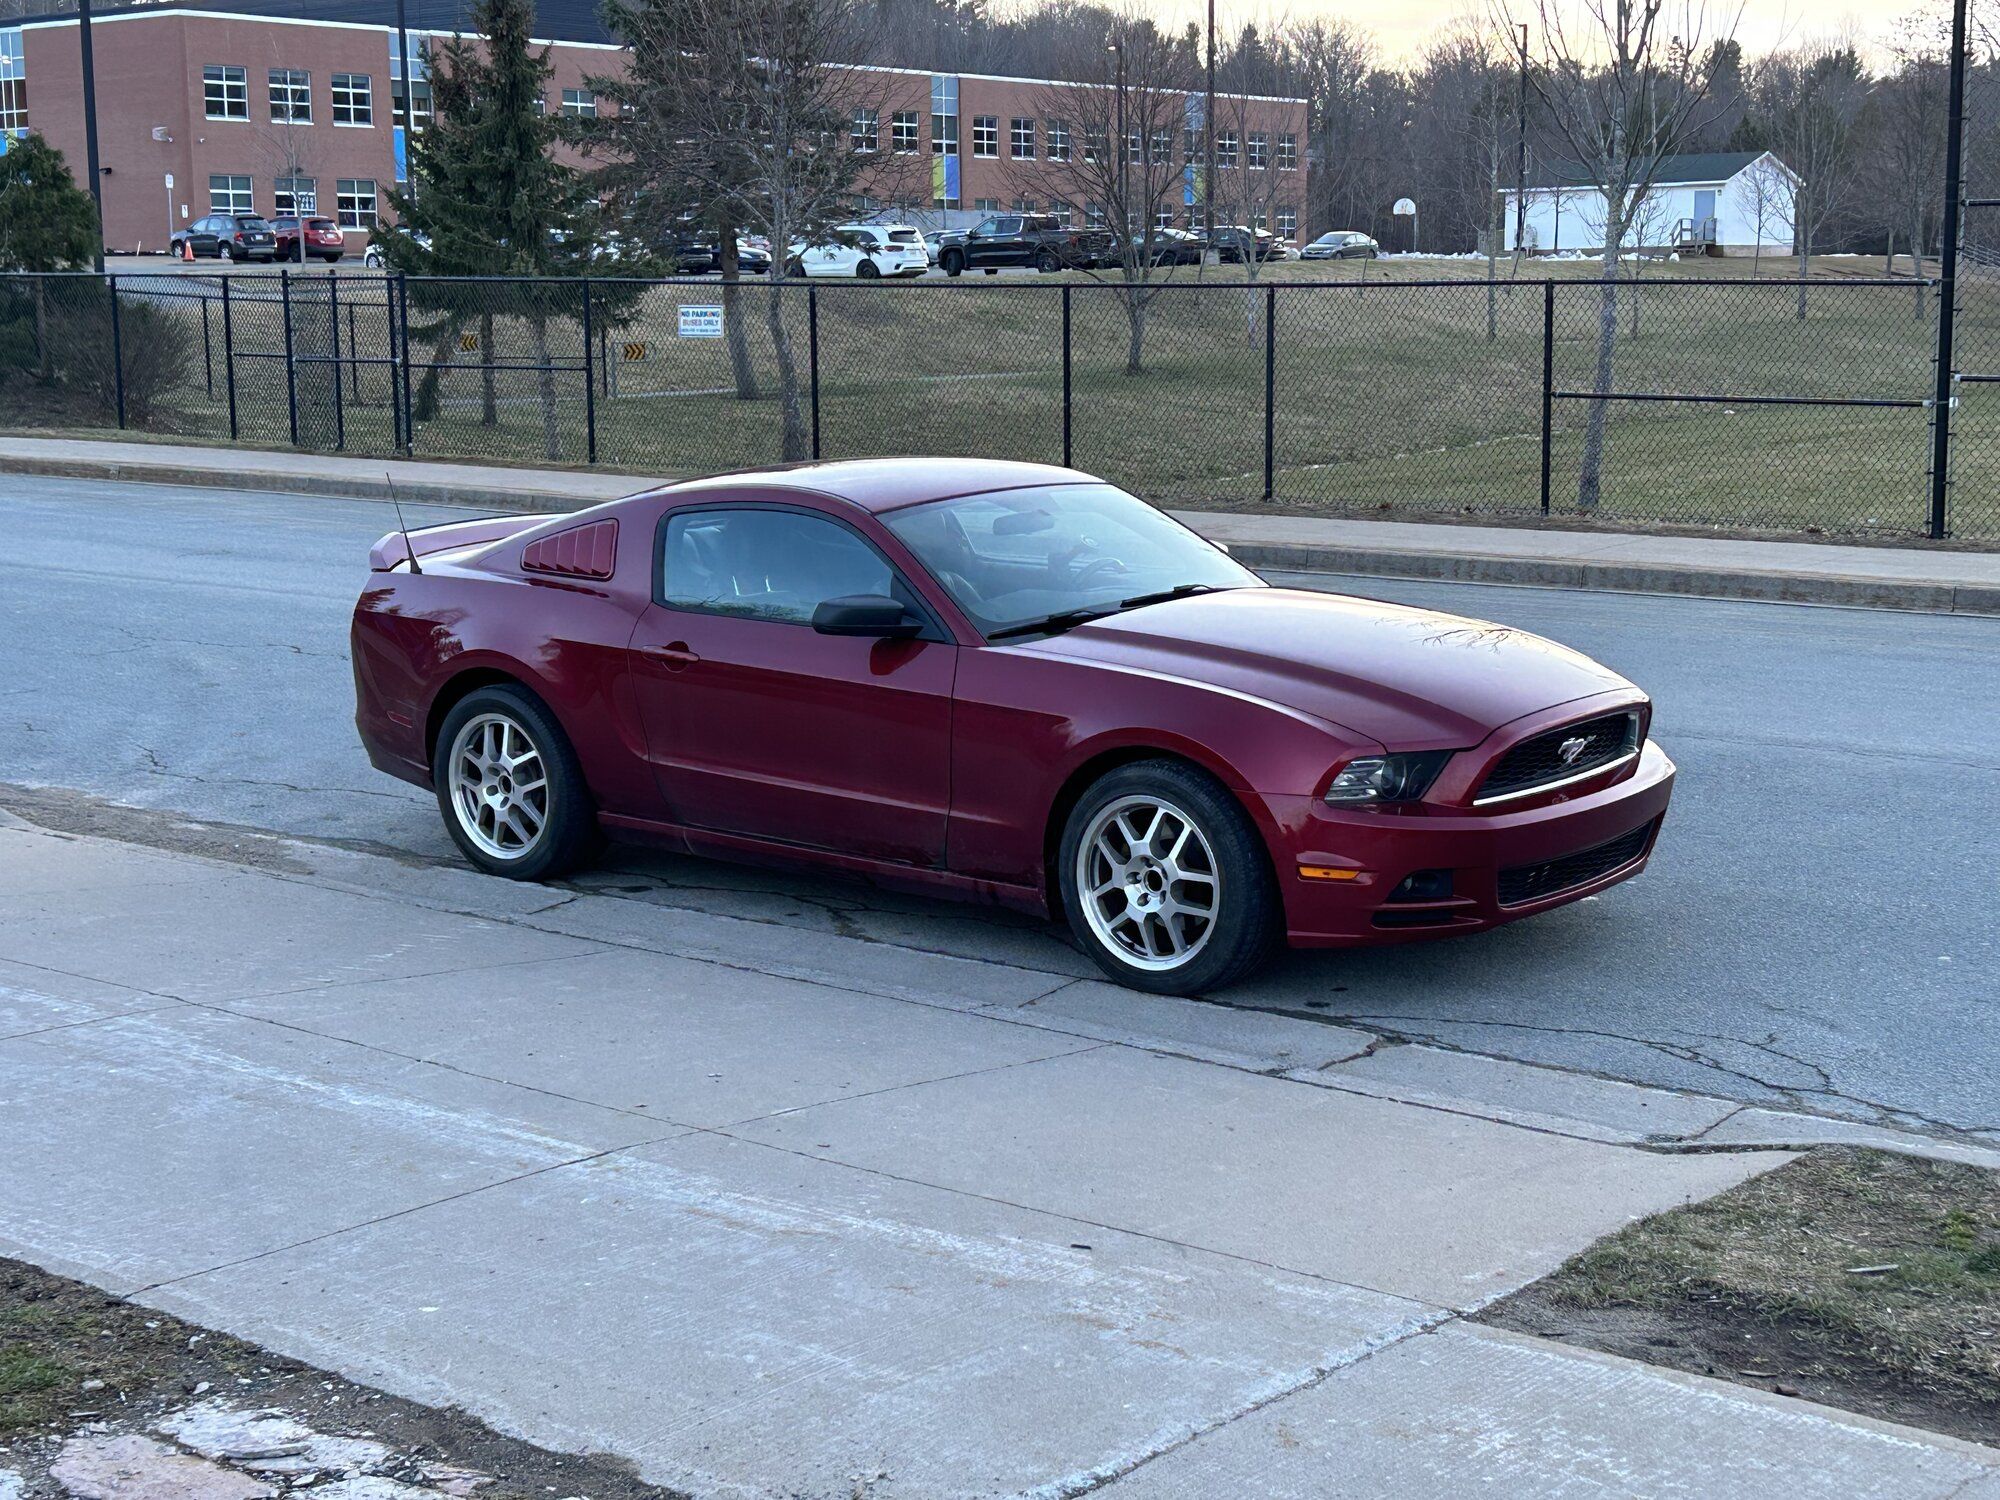 2014 Mustang
V6 HPDE/Track -  (First stang)